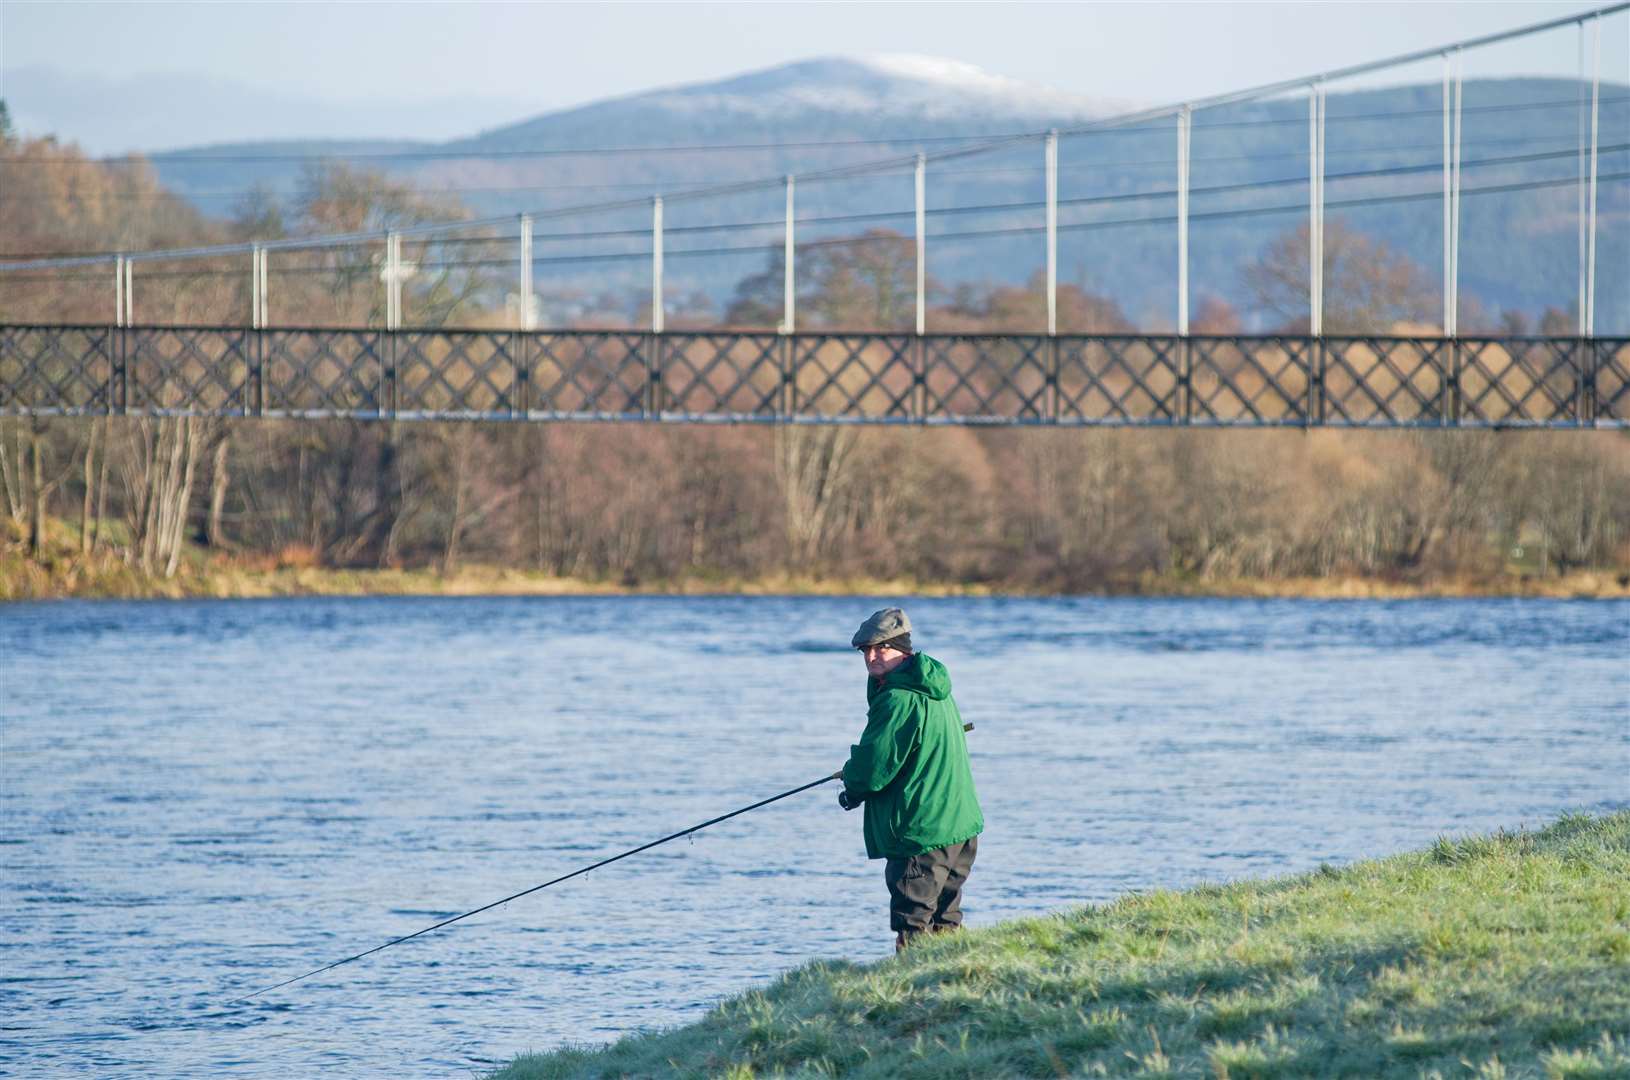 Fishing on the River Spey. Picture: Daniel Forsyth.